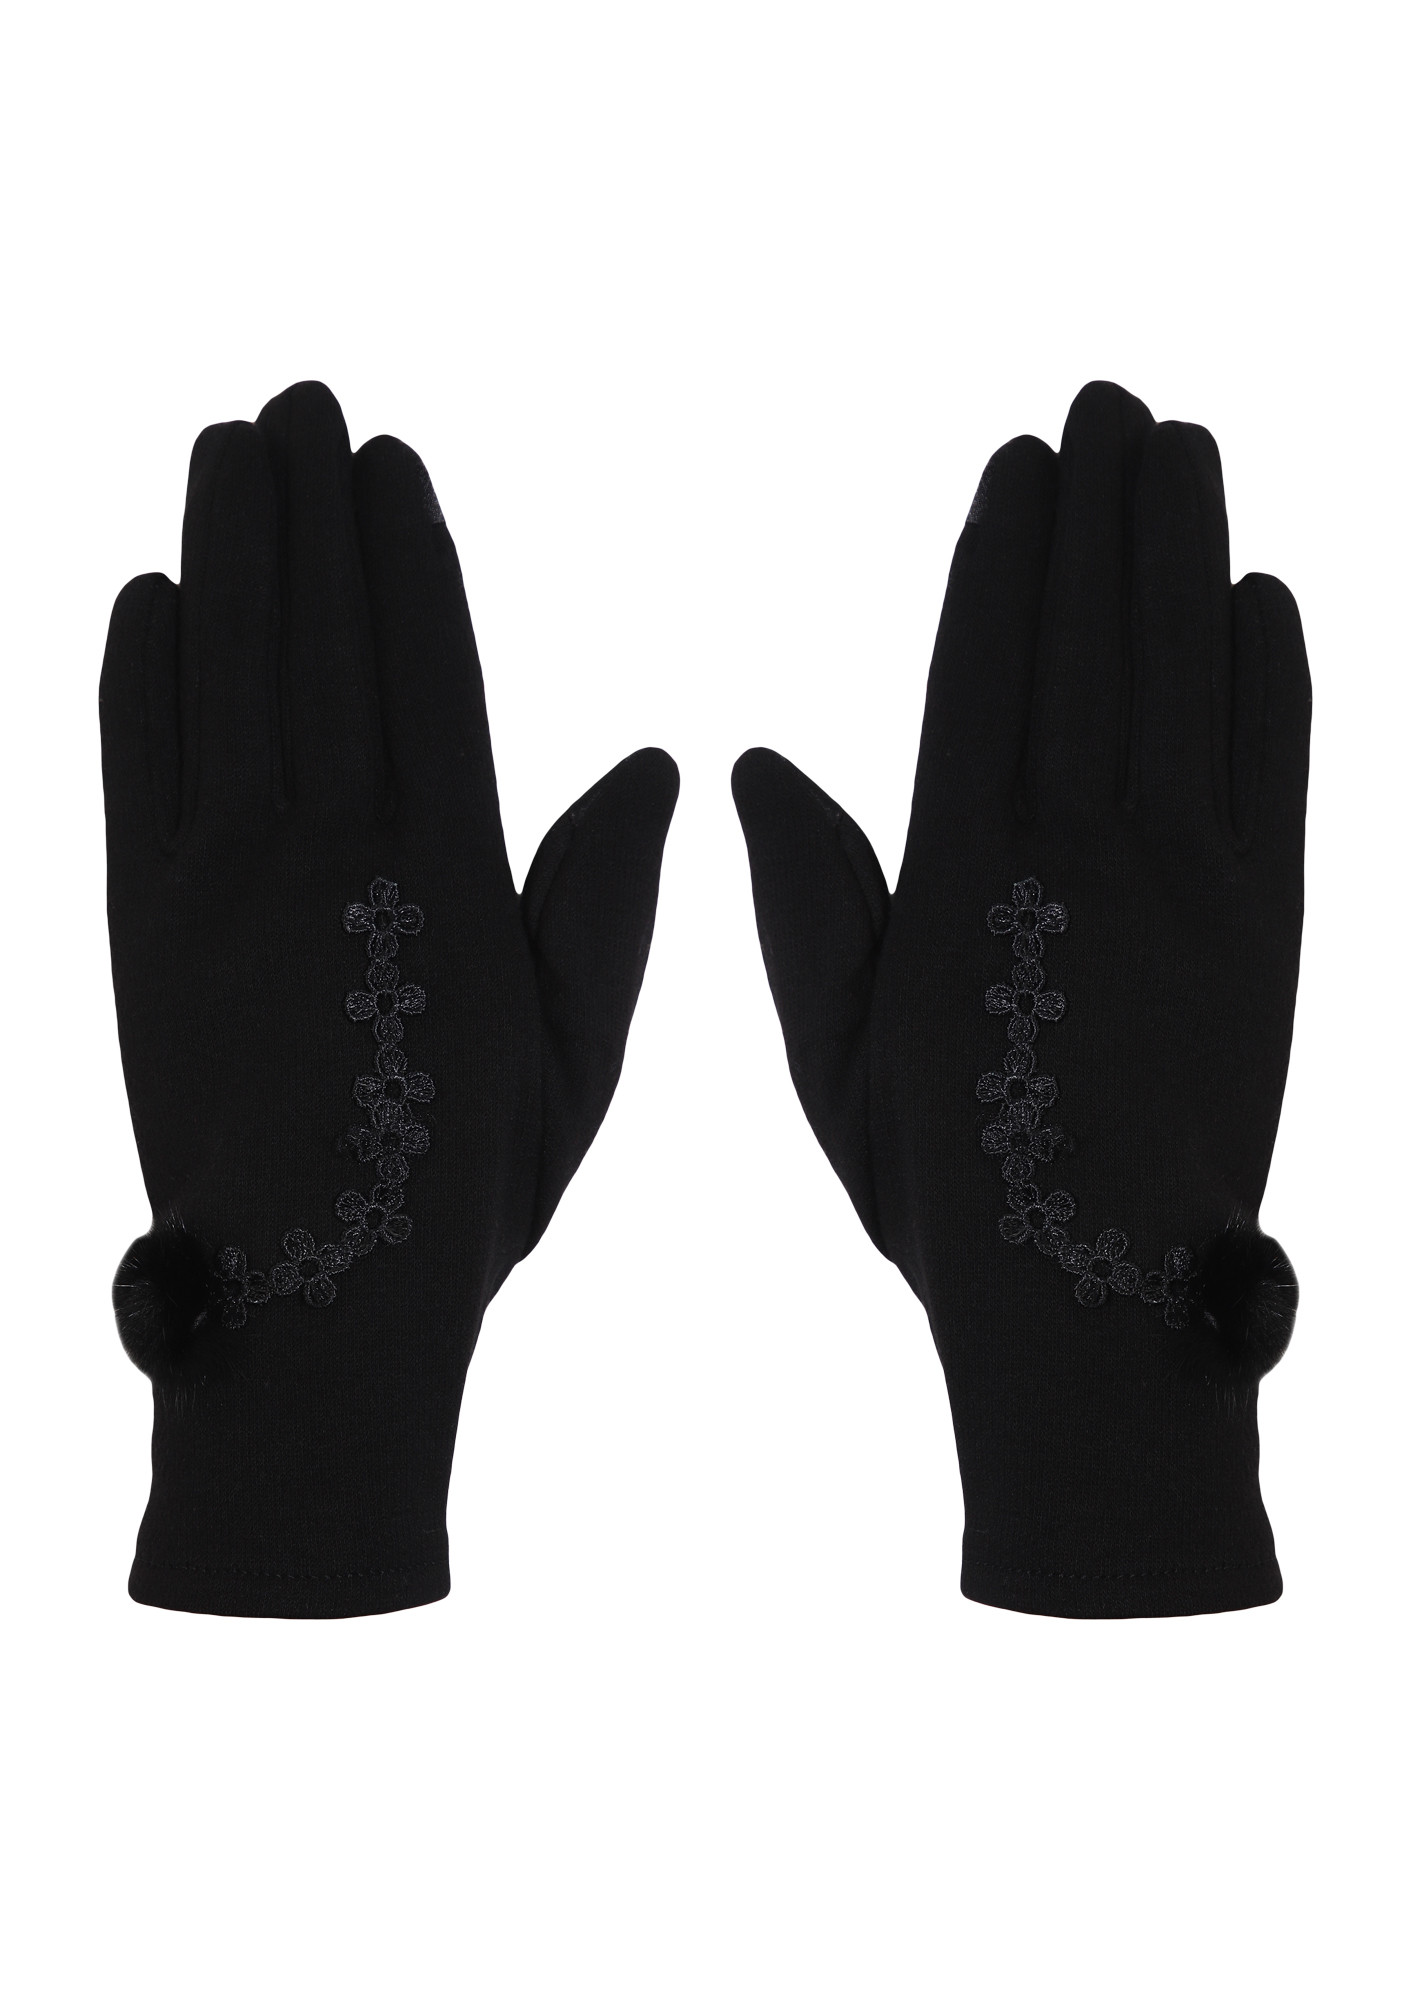 CARRY THE WARMTH DEEP GREY GLOVES